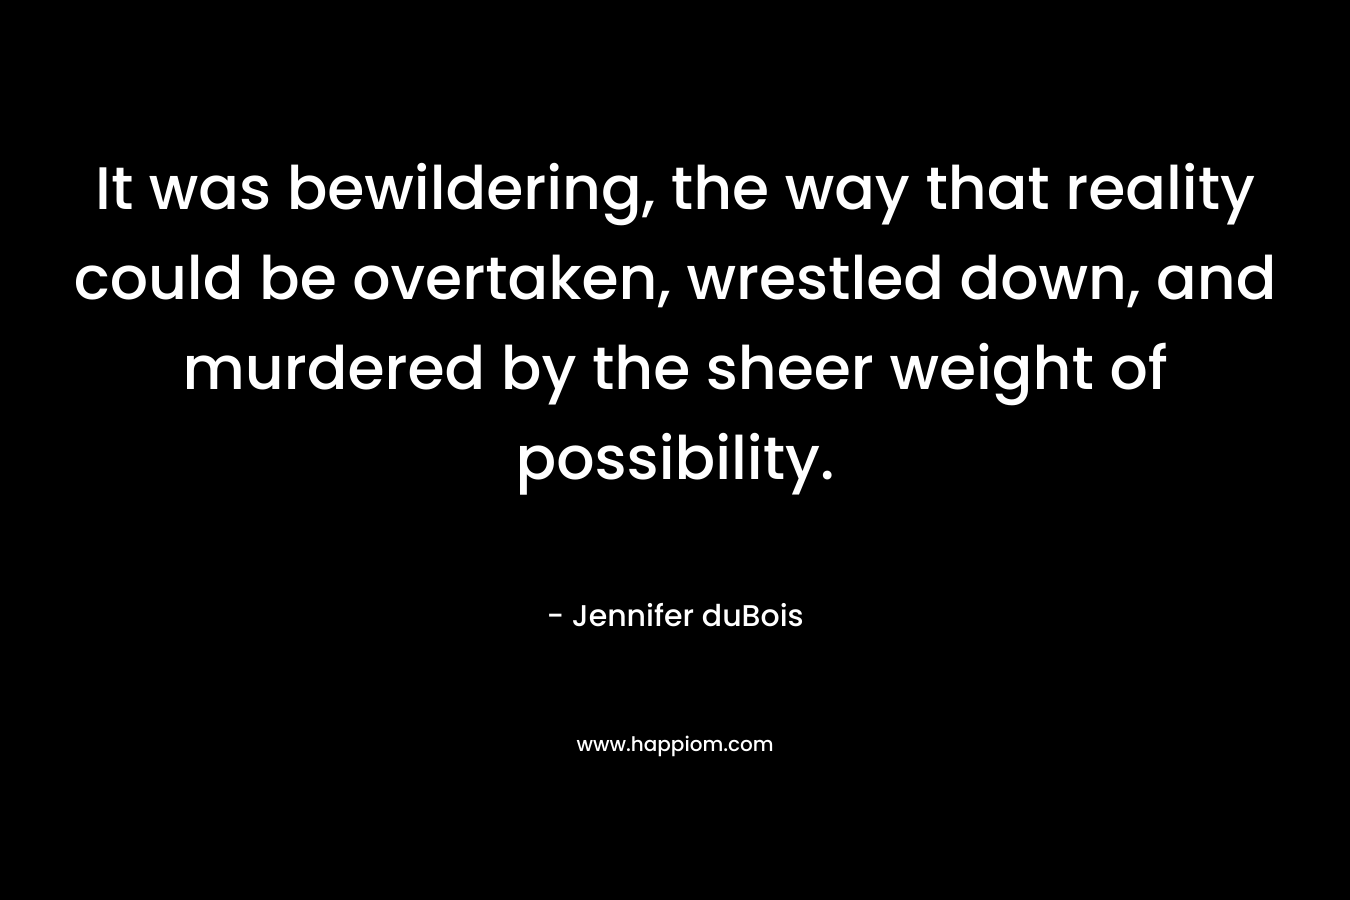 It was bewildering, the way that reality could be overtaken, wrestled down, and murdered by the sheer weight of possibility. – Jennifer duBois